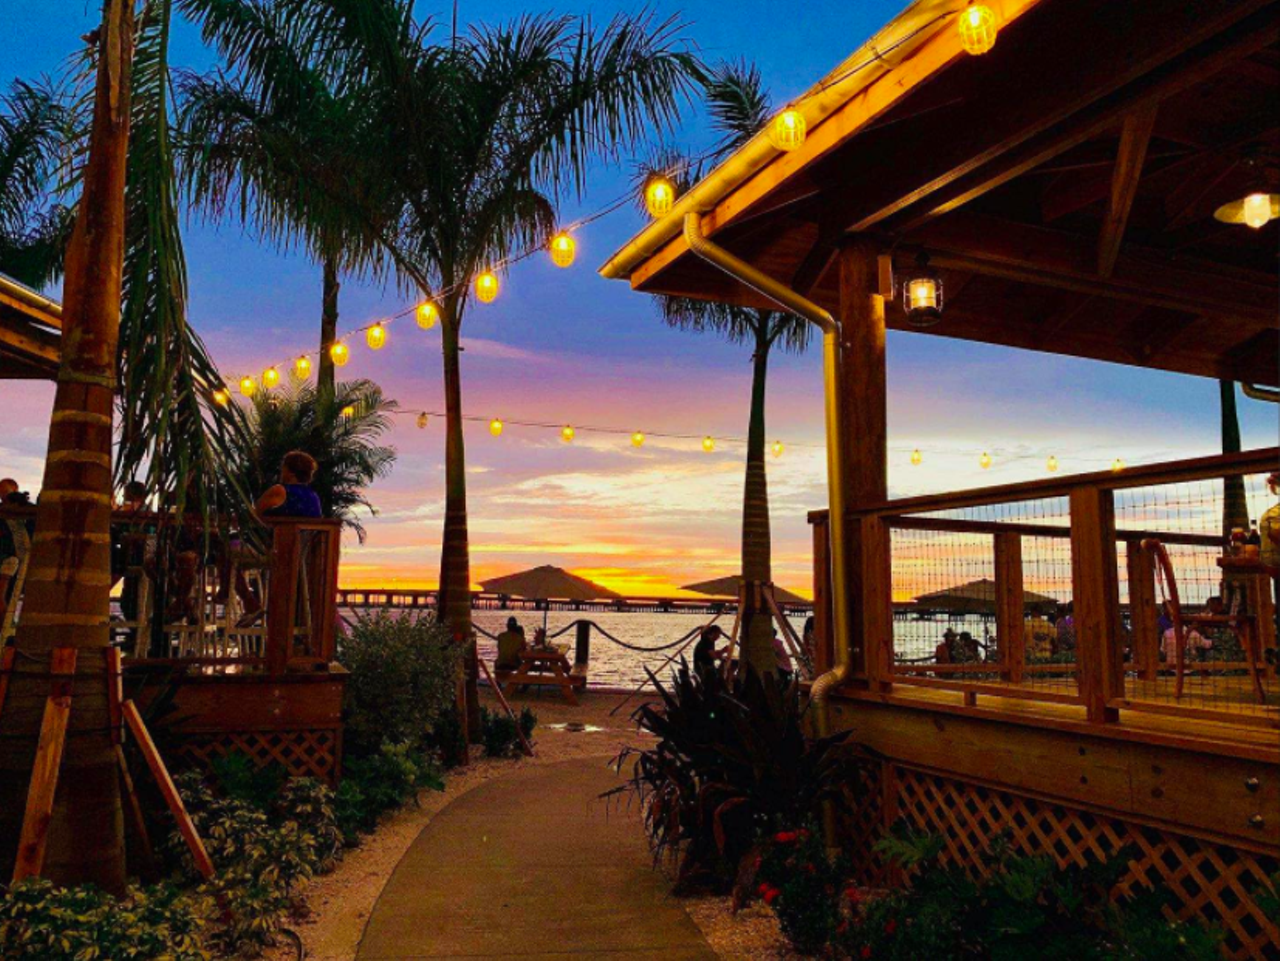 Salt Shack On The Bay
5415 W. Tyson Ave., Tampa (813) 693-9181
Get your seafood fix at Salt  Shack On The Bay, where you can sit at one of their outside tables overlooking the Old Tampa Bay.
Photo via Salt Shack On The BayFacebook